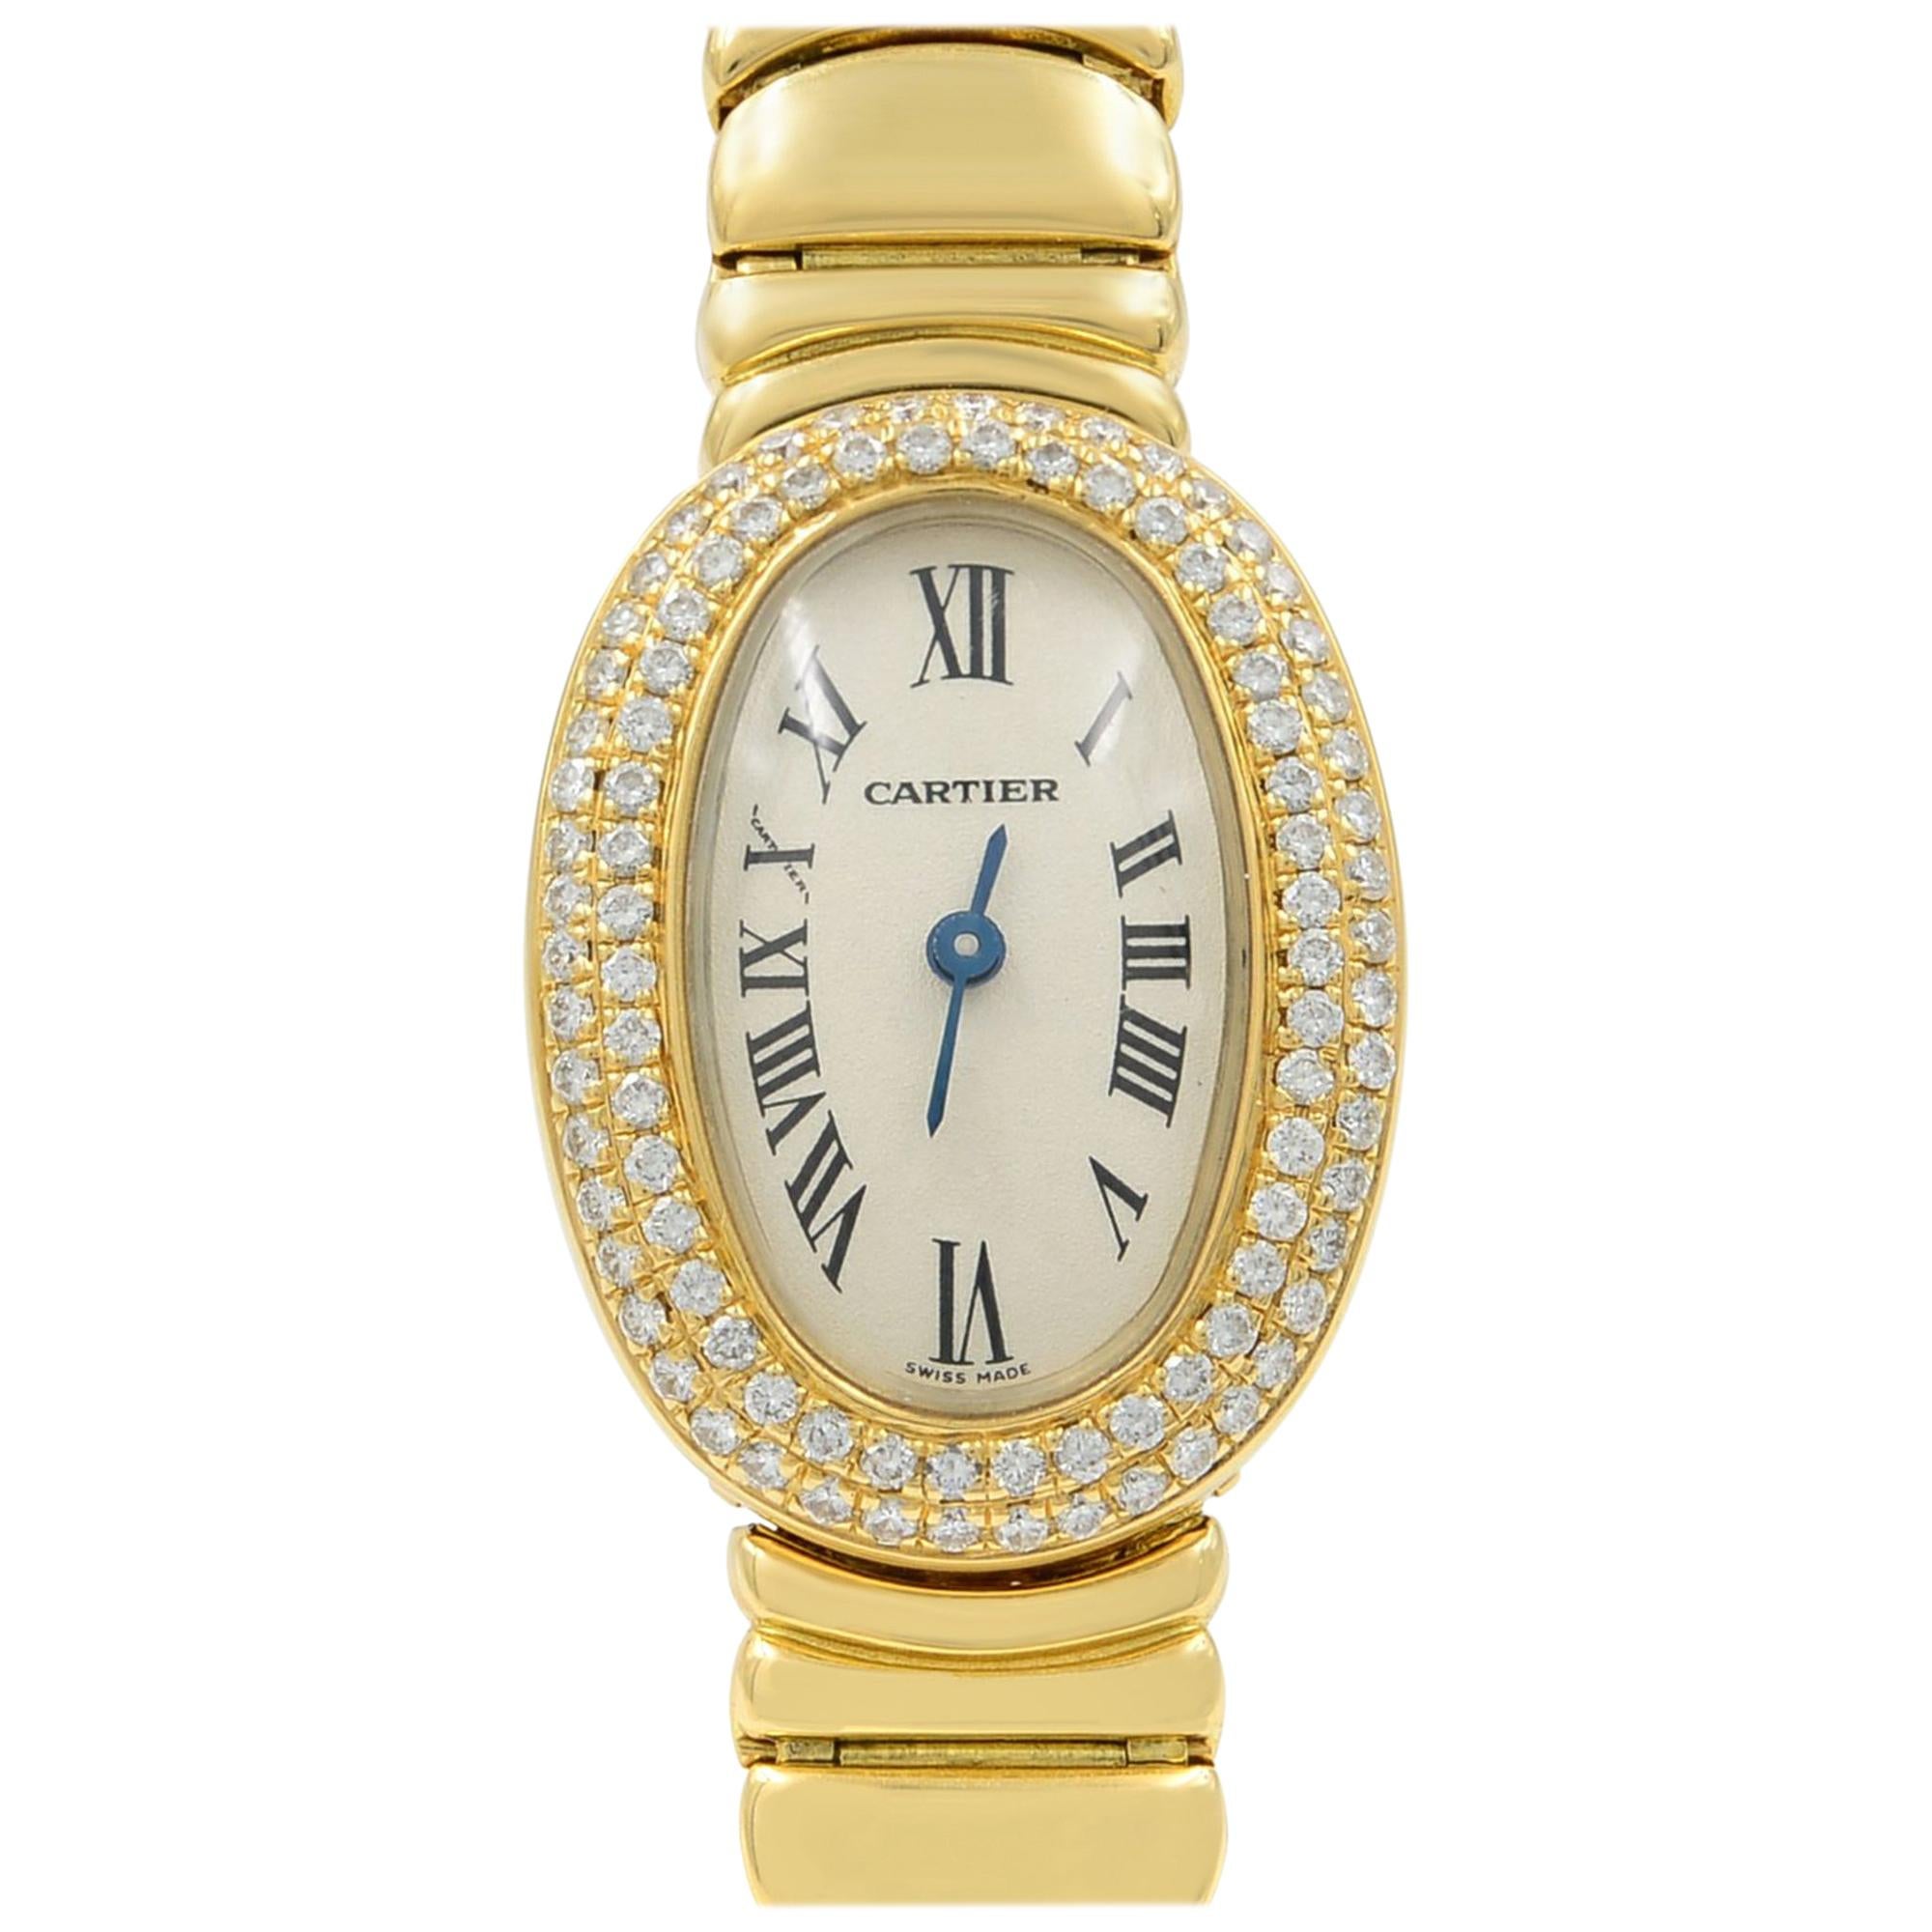 This pre-owned Cartier Baignore  WB5094WI is a beautiful Ladies timepiece that is powered by a quartz movement which is cased in a yellow gold case. It has an oval shape face, diamonds dial, and has hand roman numerals style markers. It is completed